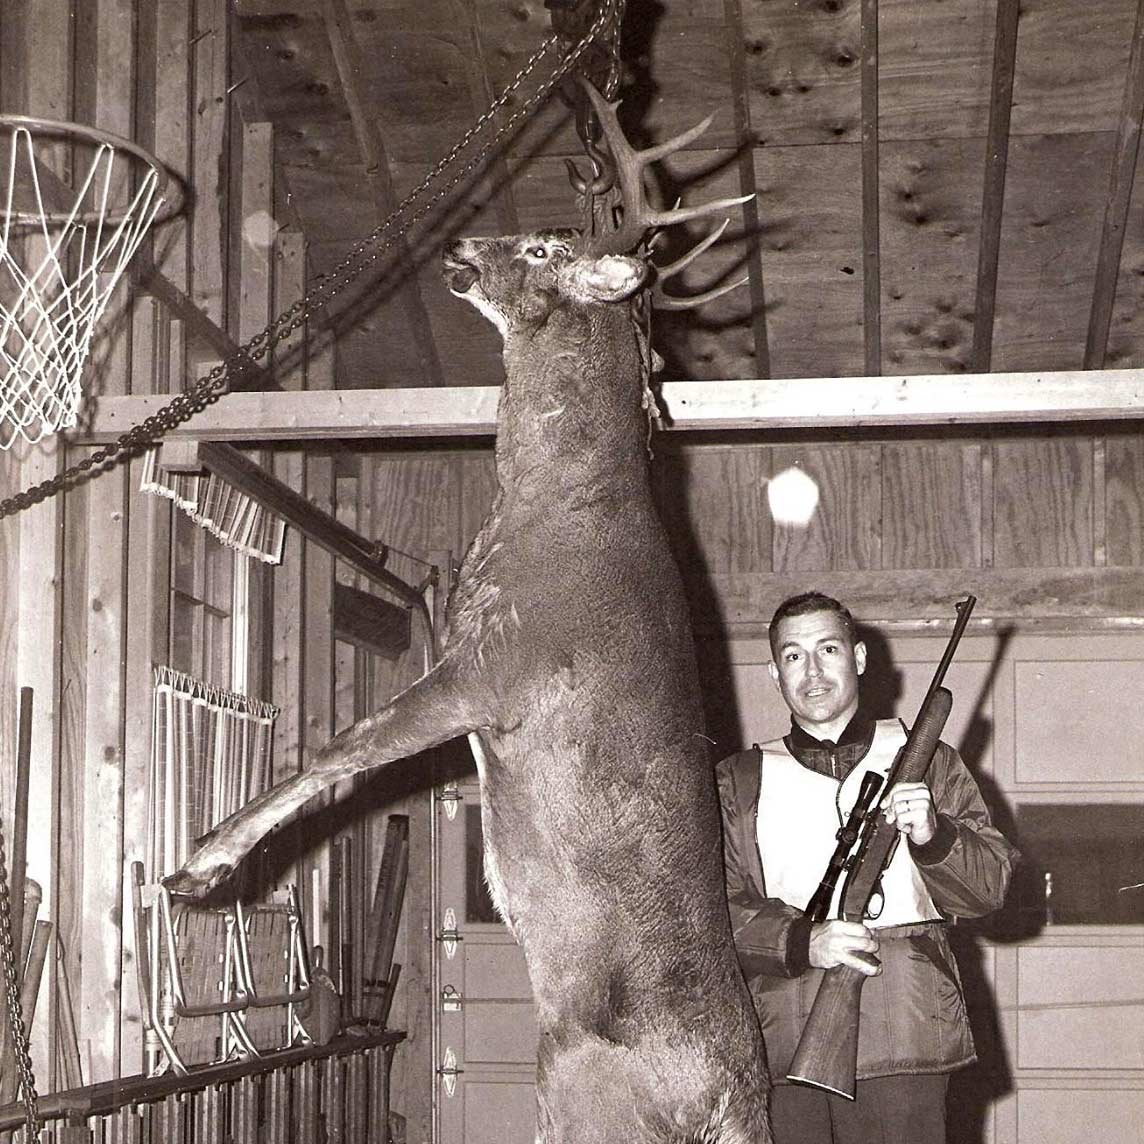 A black and white photo of a man standing behind a deer.